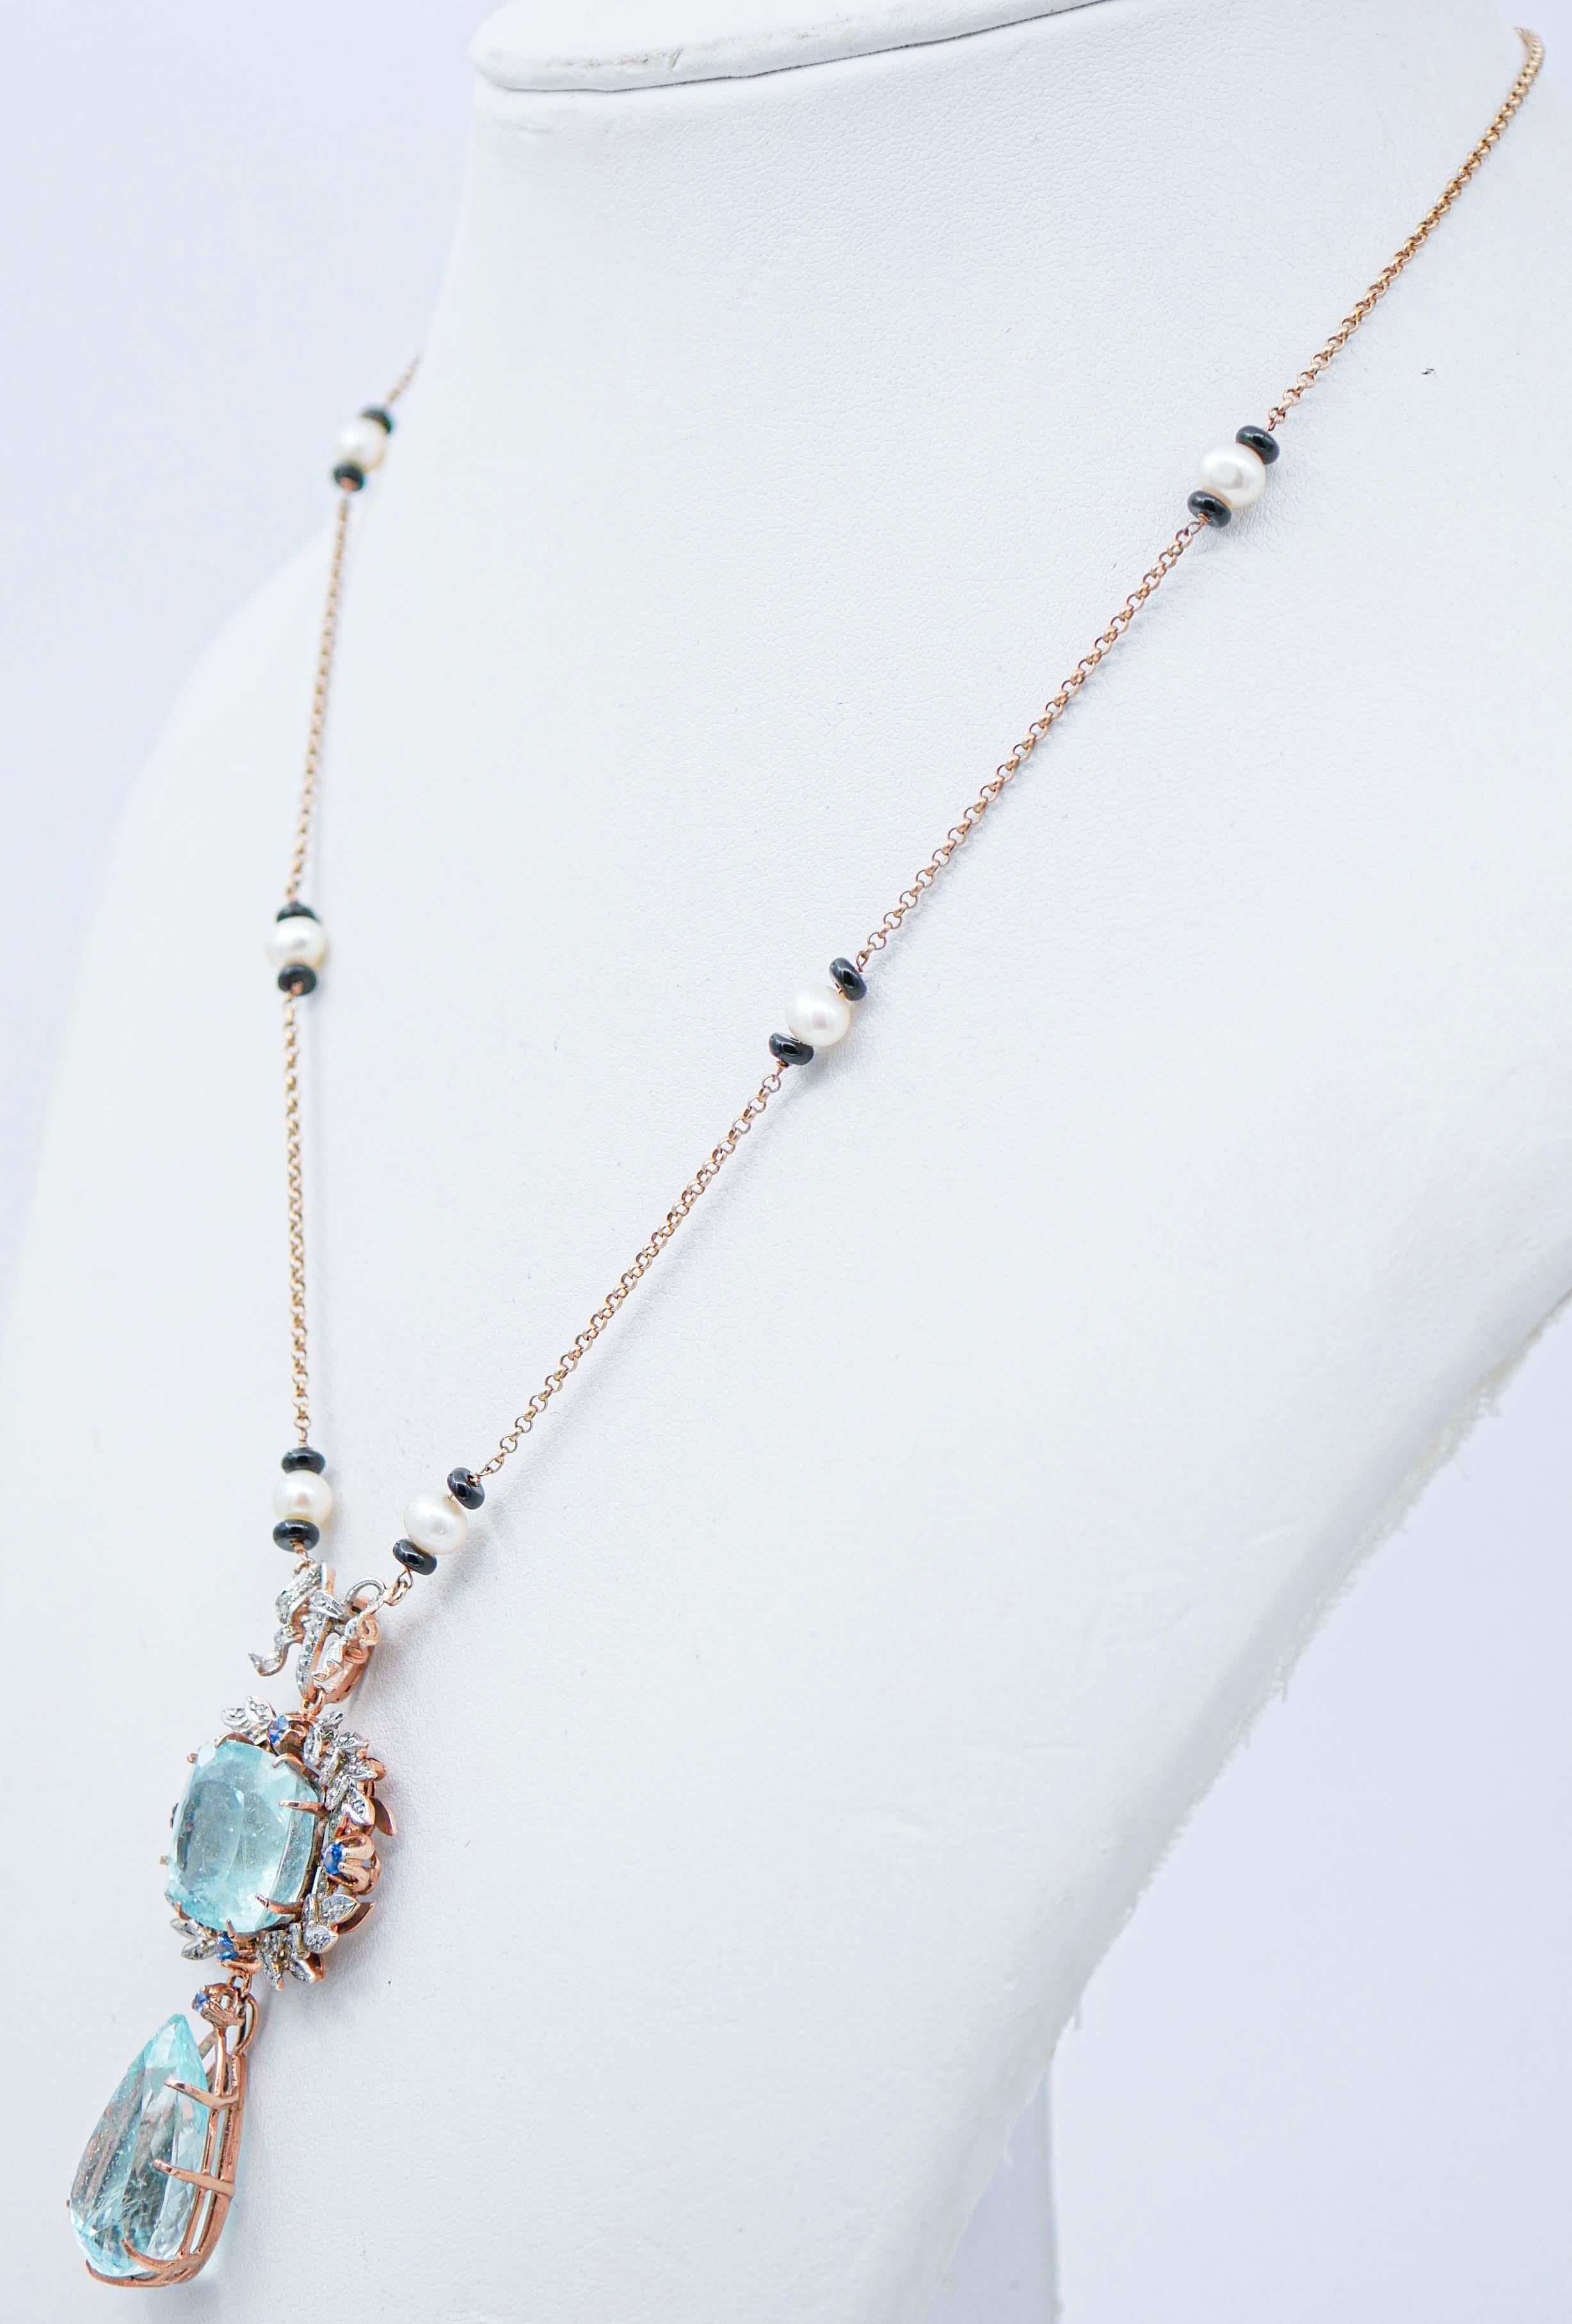 Taille mixte Aquamarine, Sapphires, Diamonds, Onyx, Pearls, Gold and Silver Pendant Necklace en vente